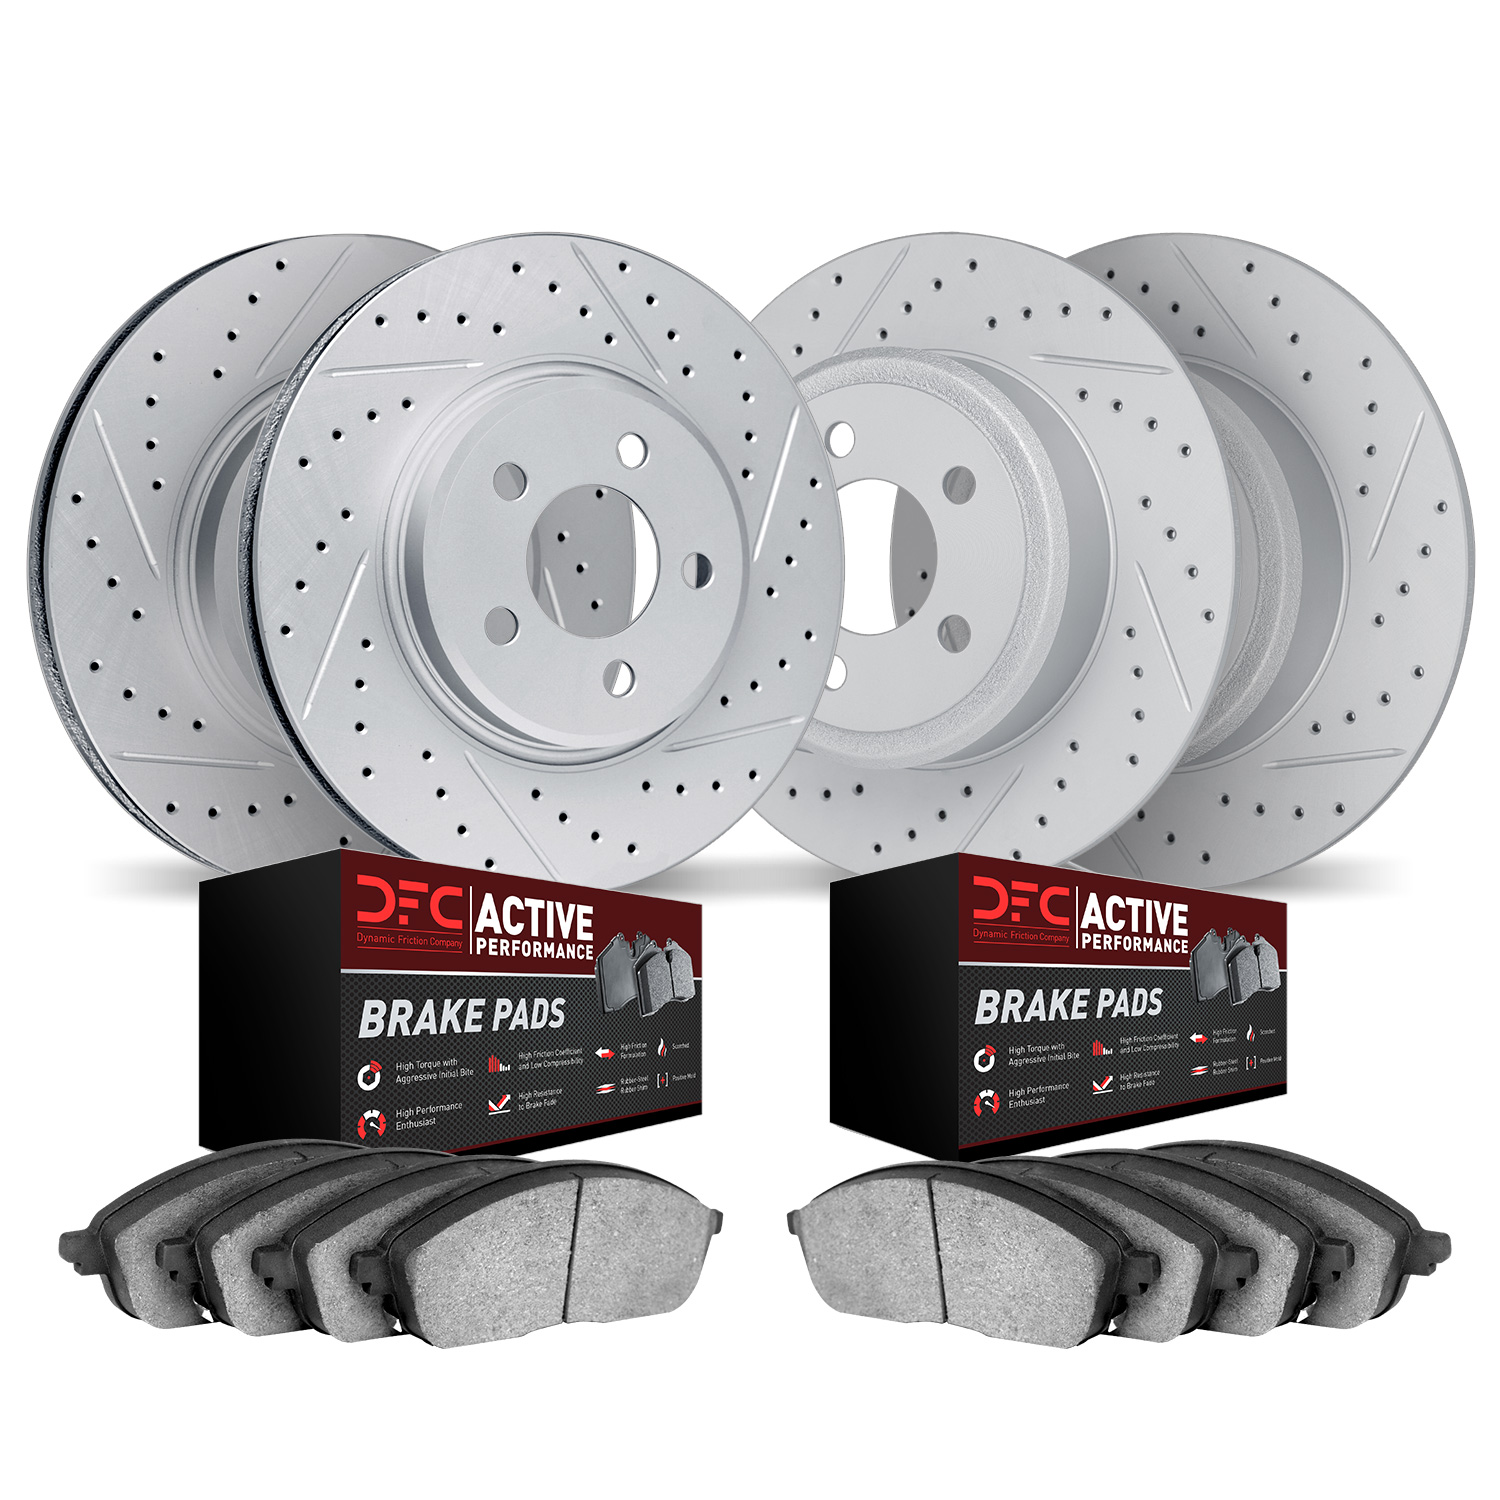 2704-72009 Geoperformance Drilled/Slotted Brake Rotors with Active Performance Pads Kit, 2000-2005 Multiple Makes/Models, Positi